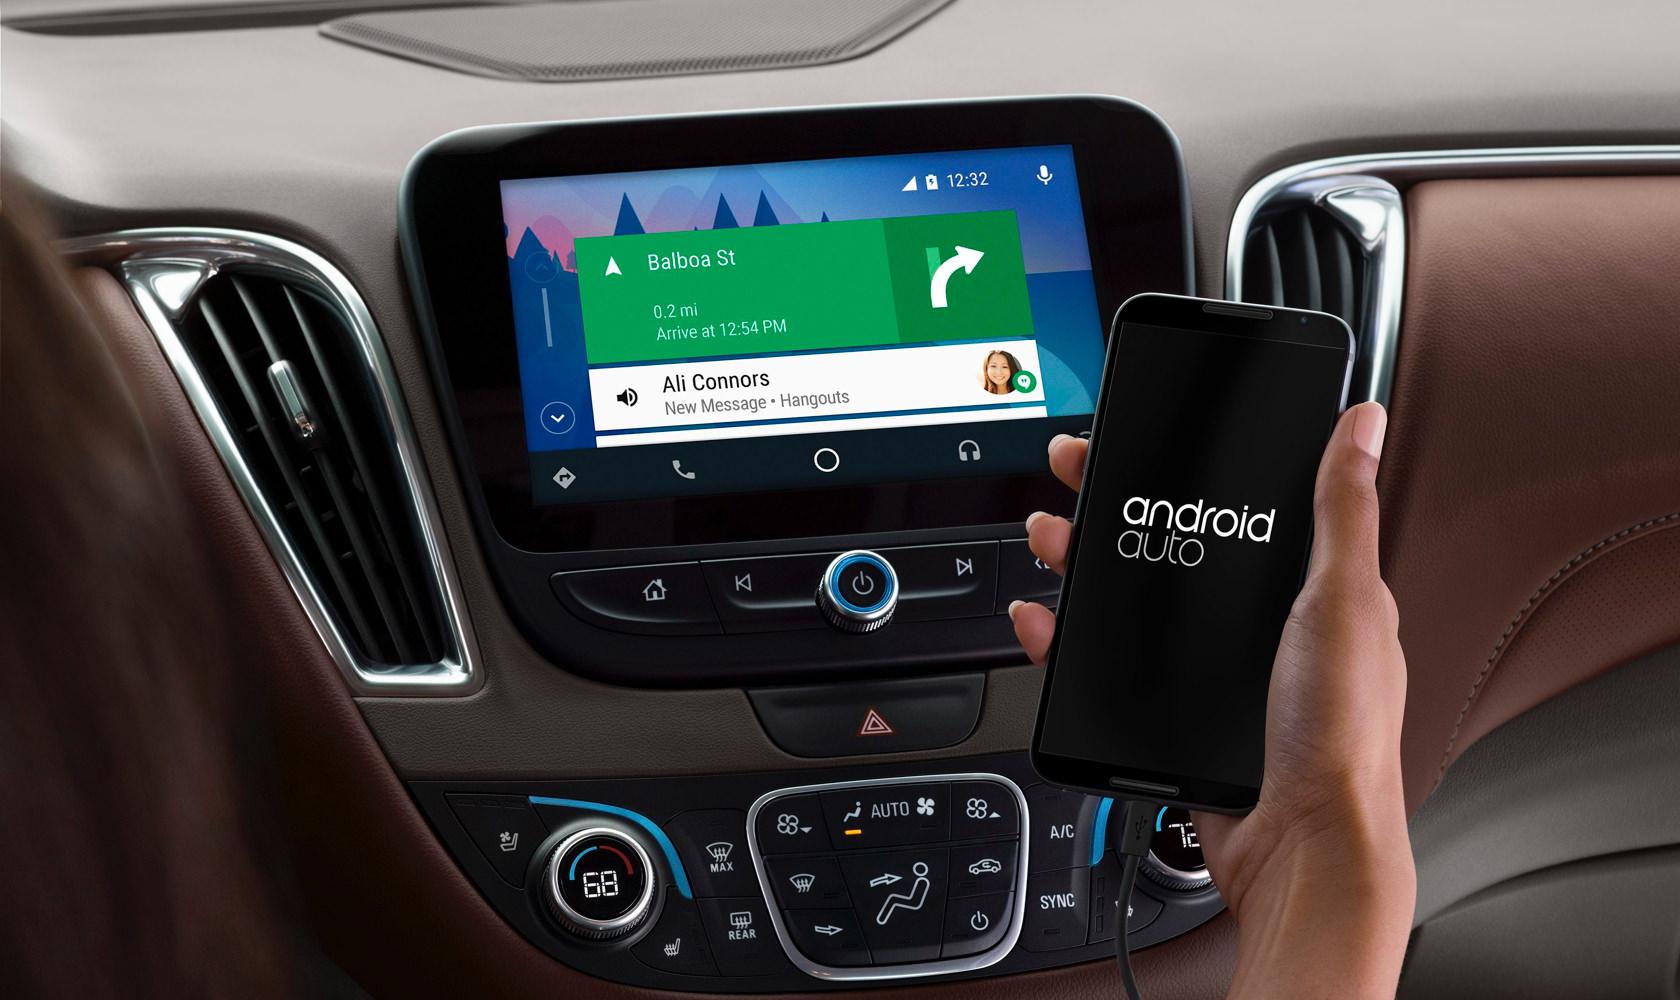 Android Auto voice app and voice user interface